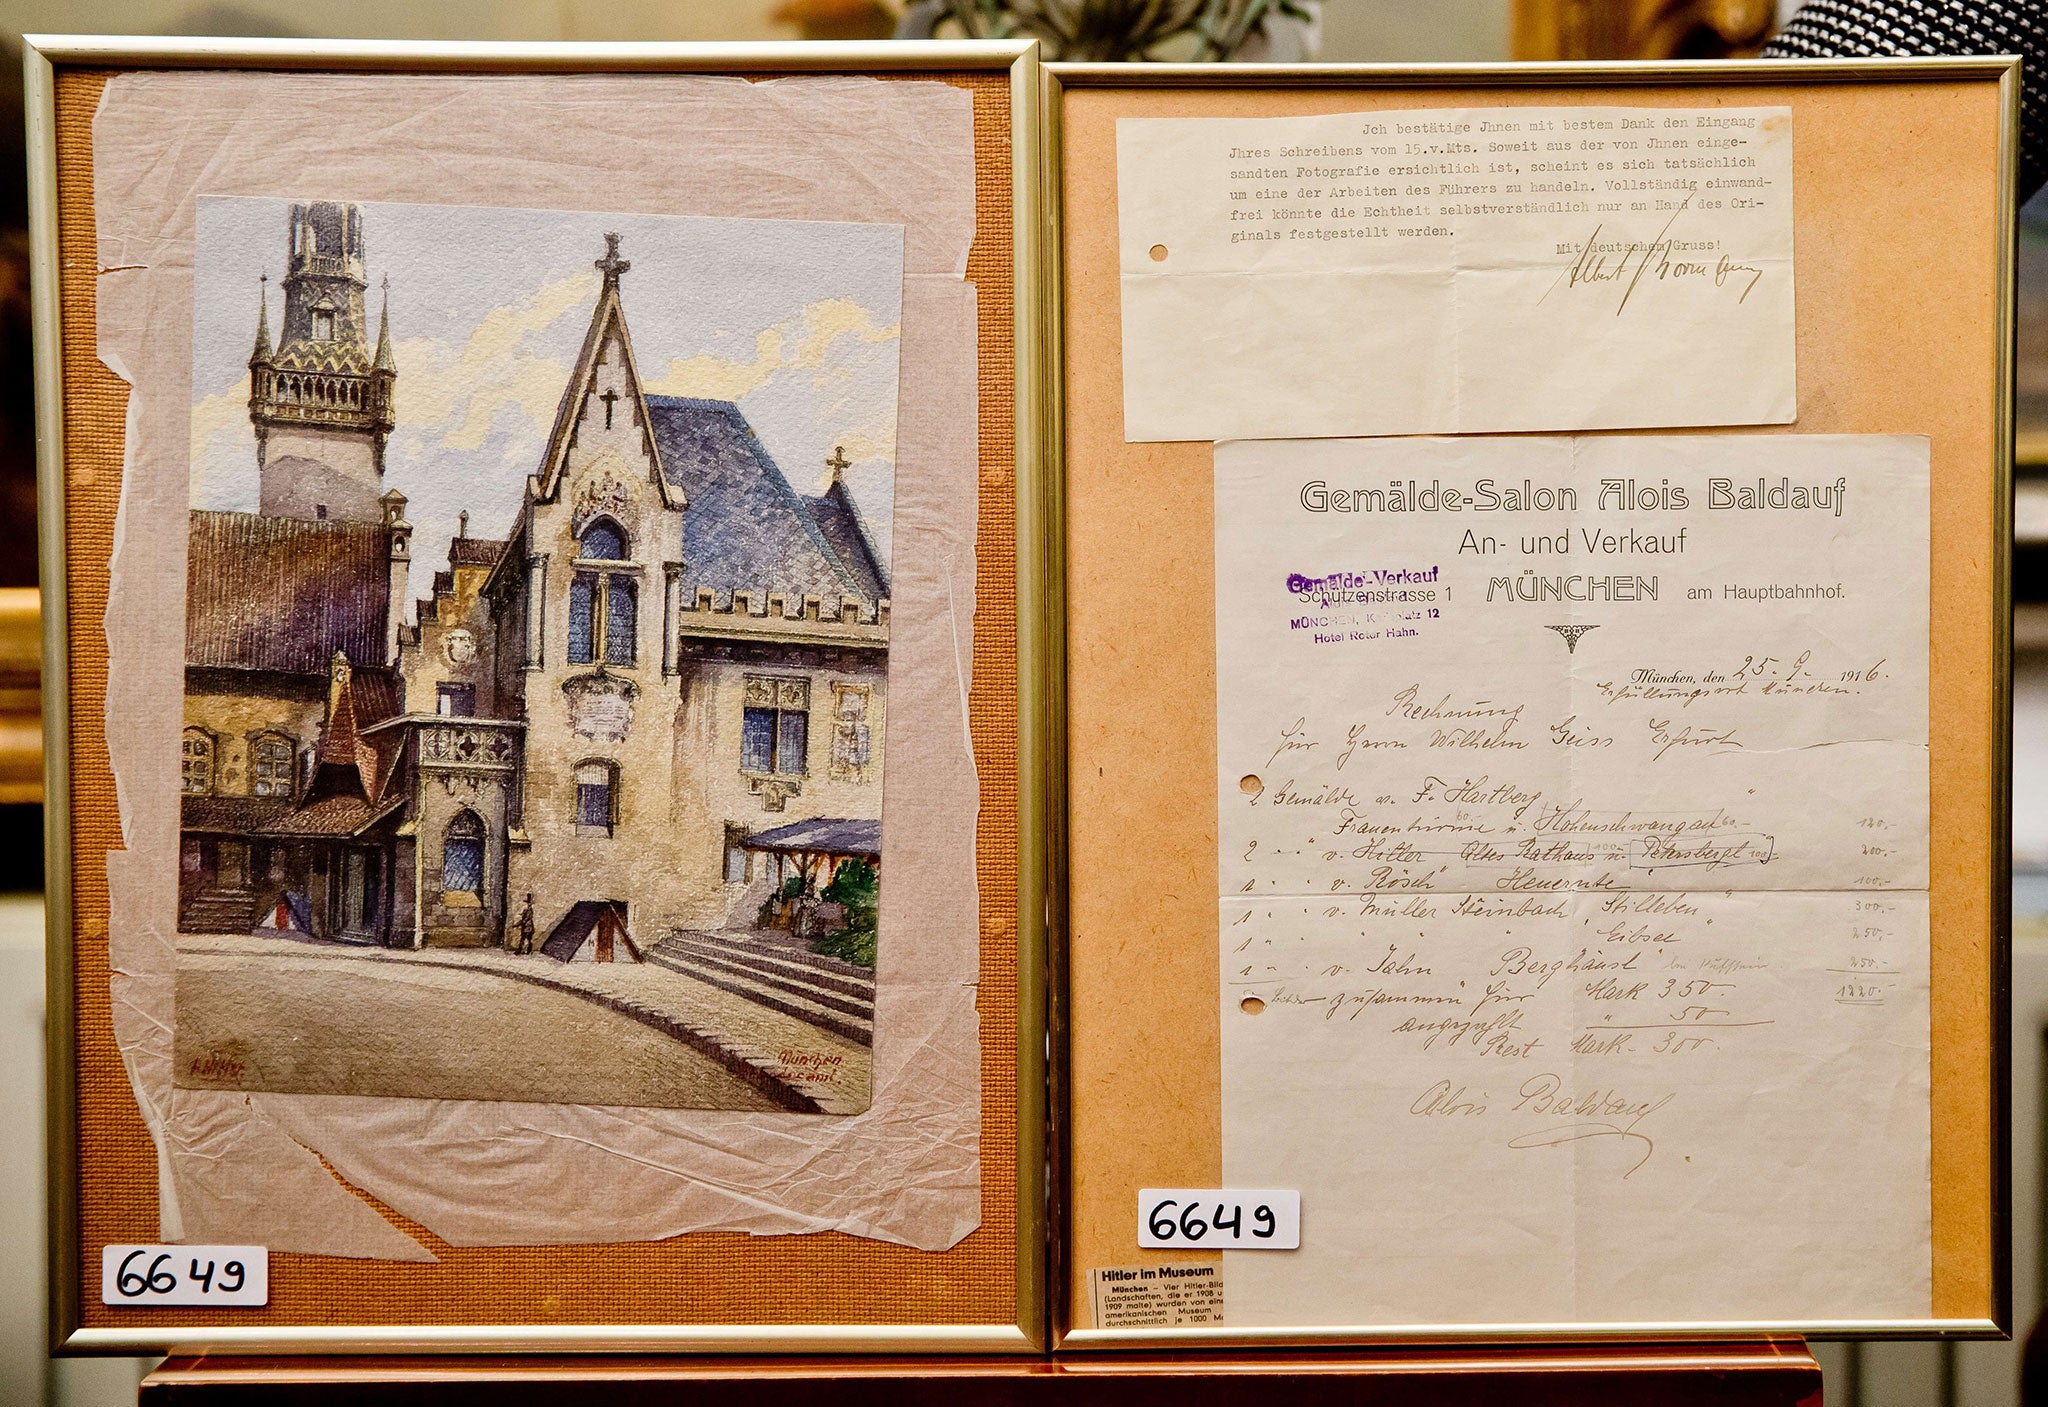 Adolf Hitler's 1914 watercolour 'Altes Rathaus' and the original invoice from 1916